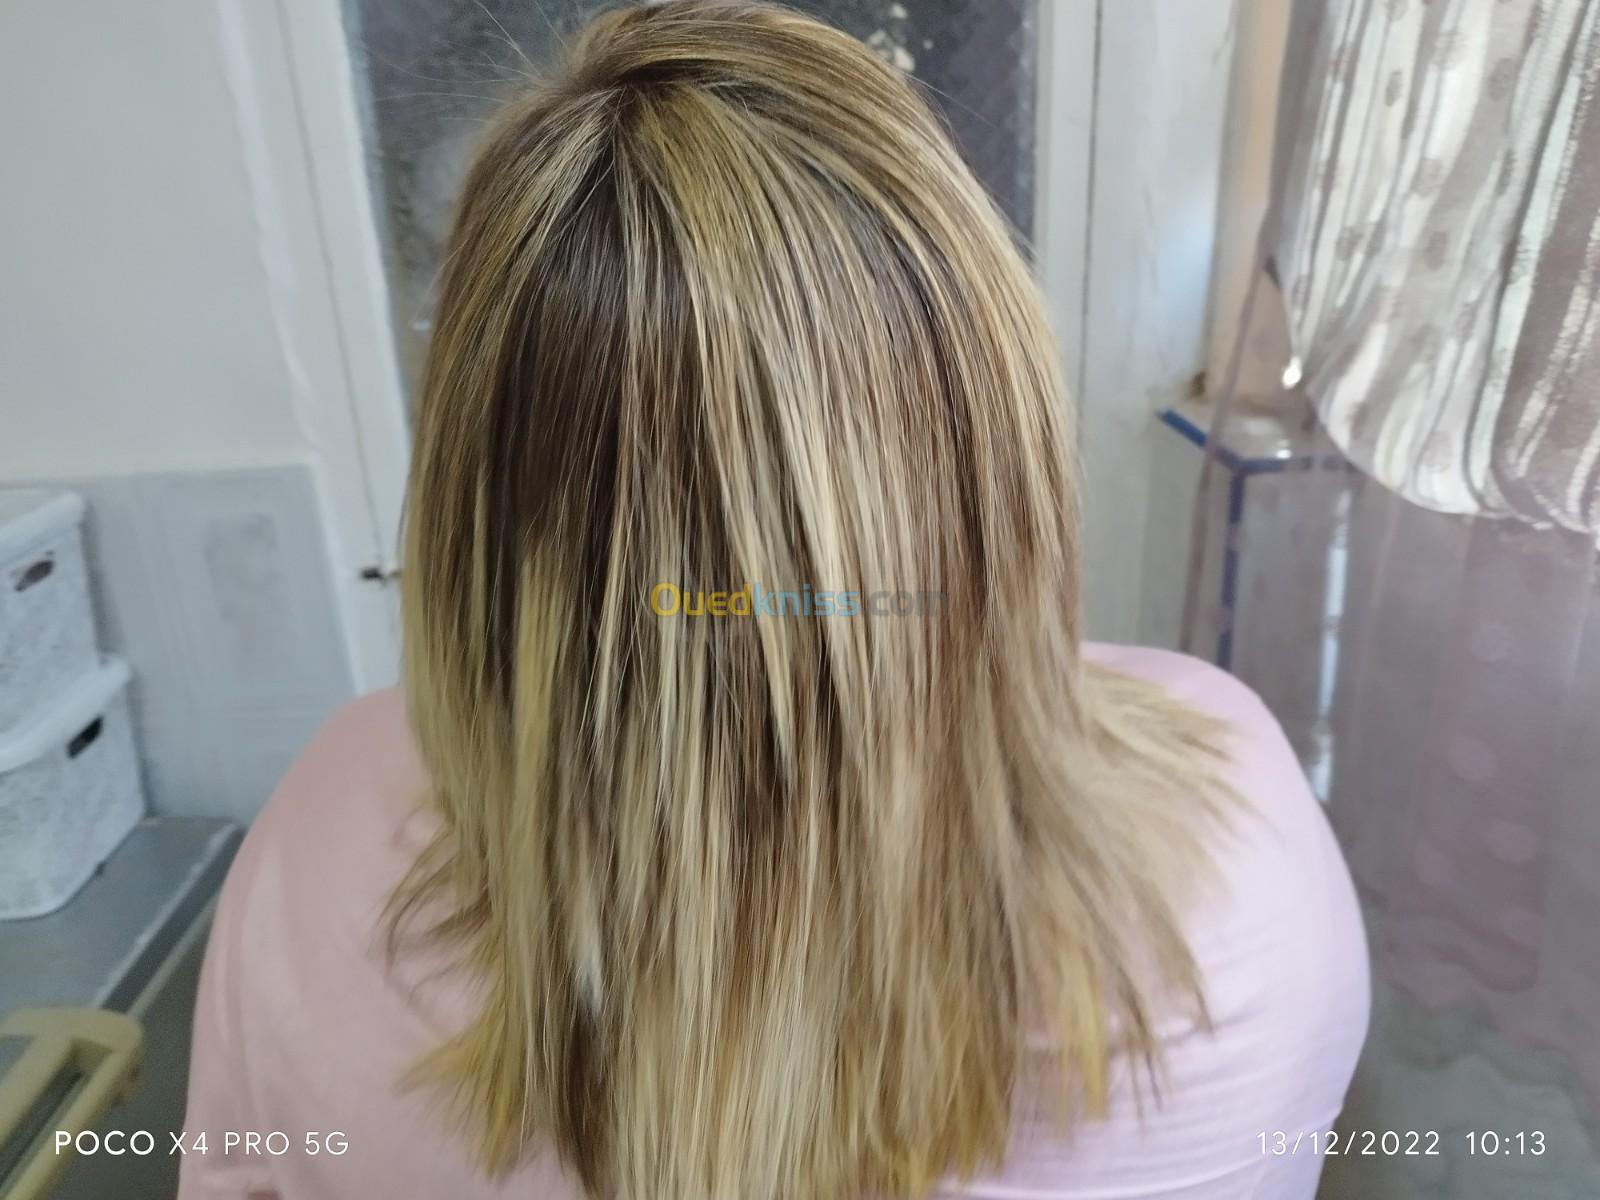 Coiffeuse professionnel 